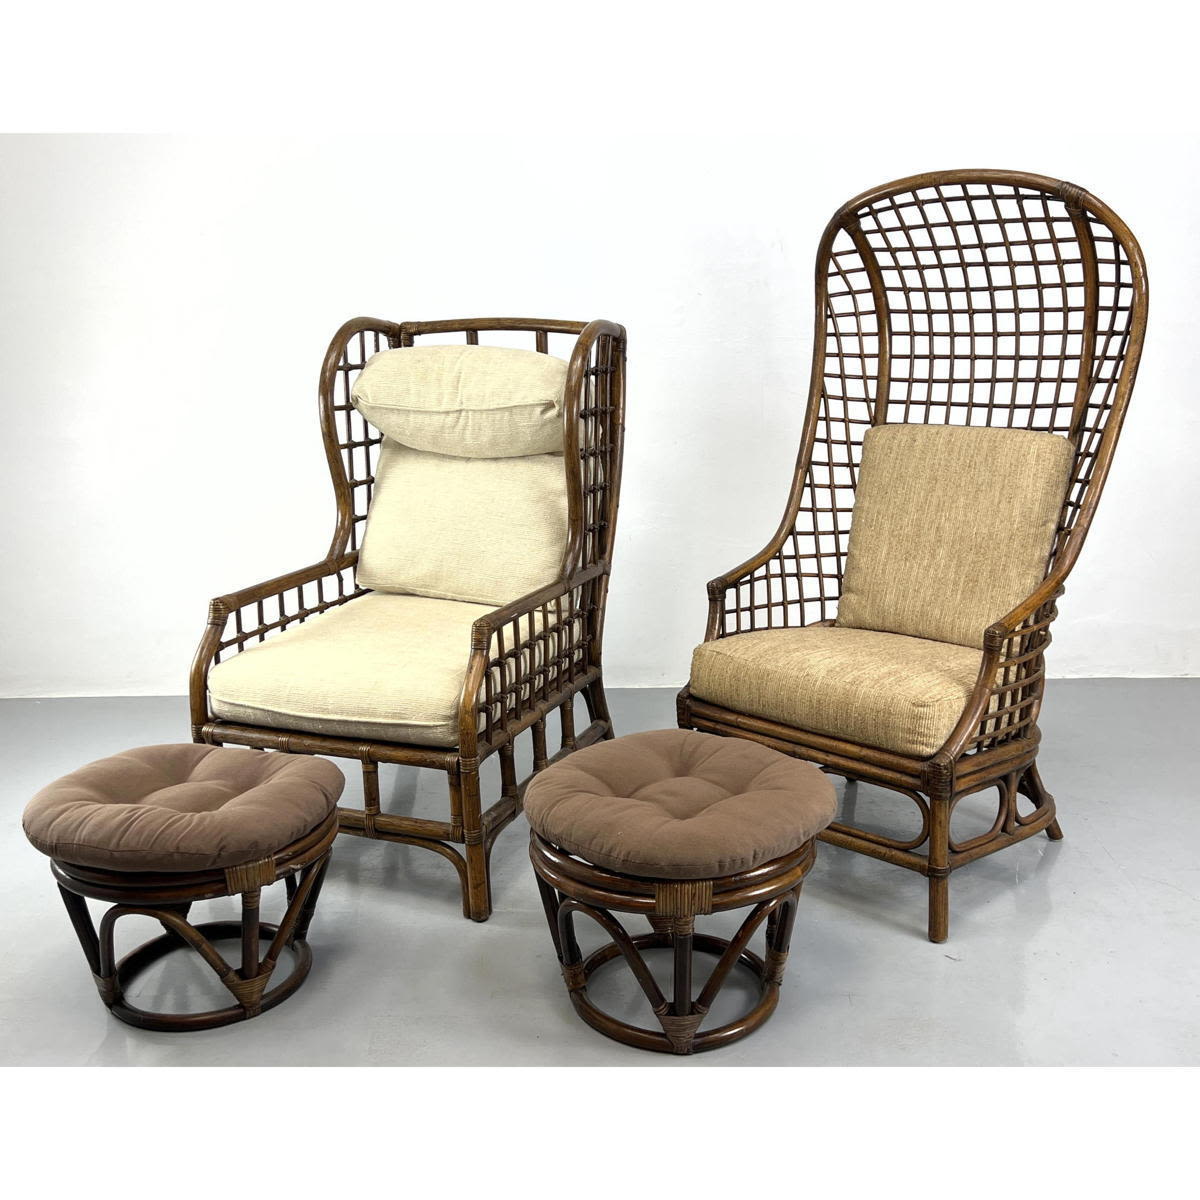 4pc Dark Stained Rattan Chairs 2a785a